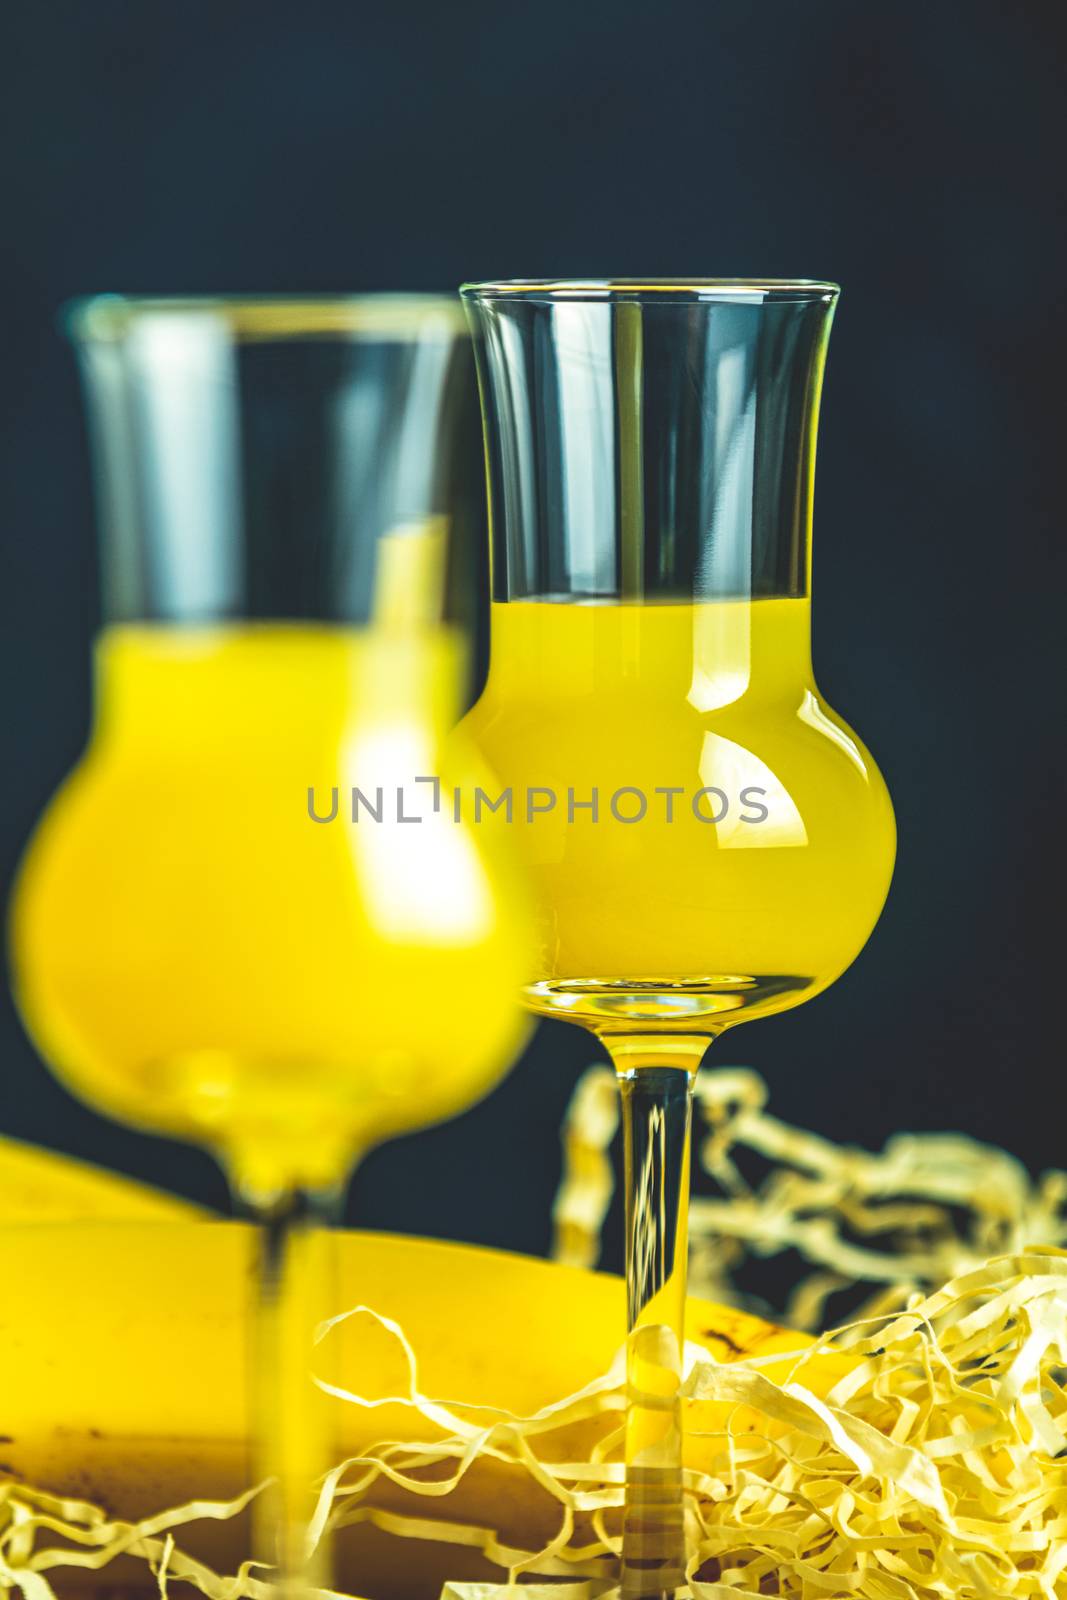 Banana flavoured liqueurs, which French call creme de banana, in  grappas wineglass on dark concrete surface. European aperitif drink. Selective focus, shallow depth of the fields, copy space.